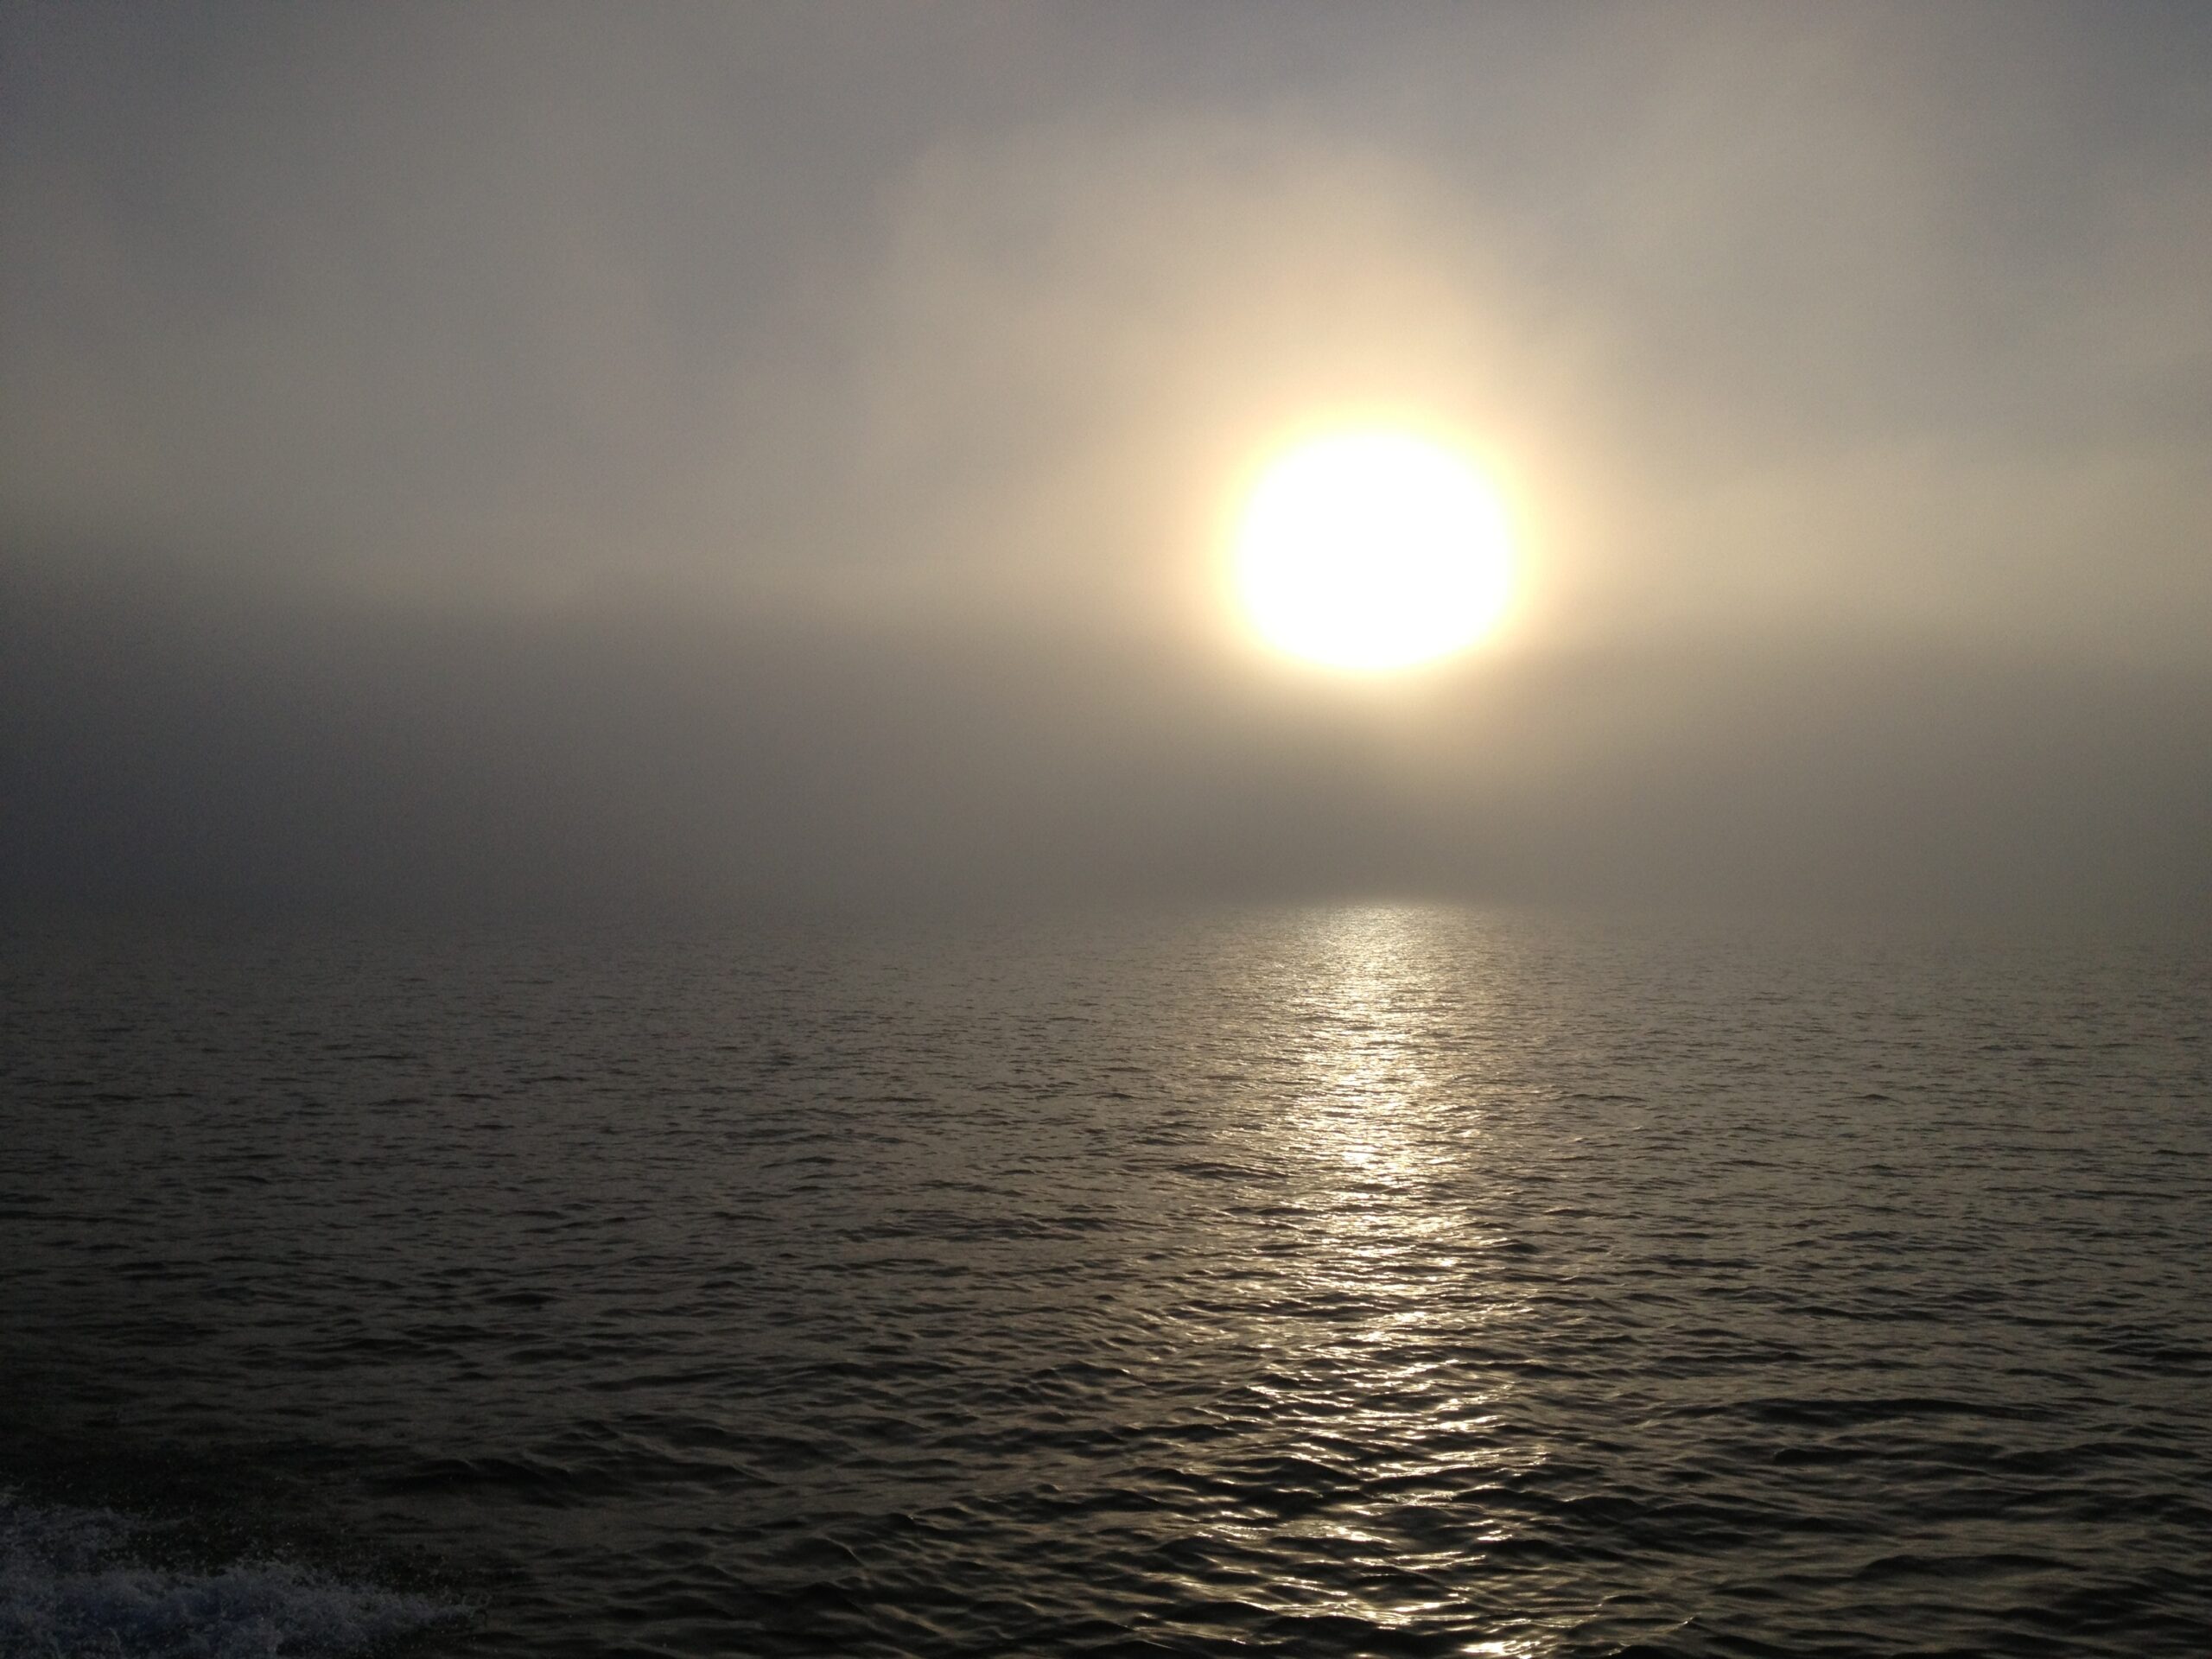 Photograph of the sun rising behind mist over the ocean